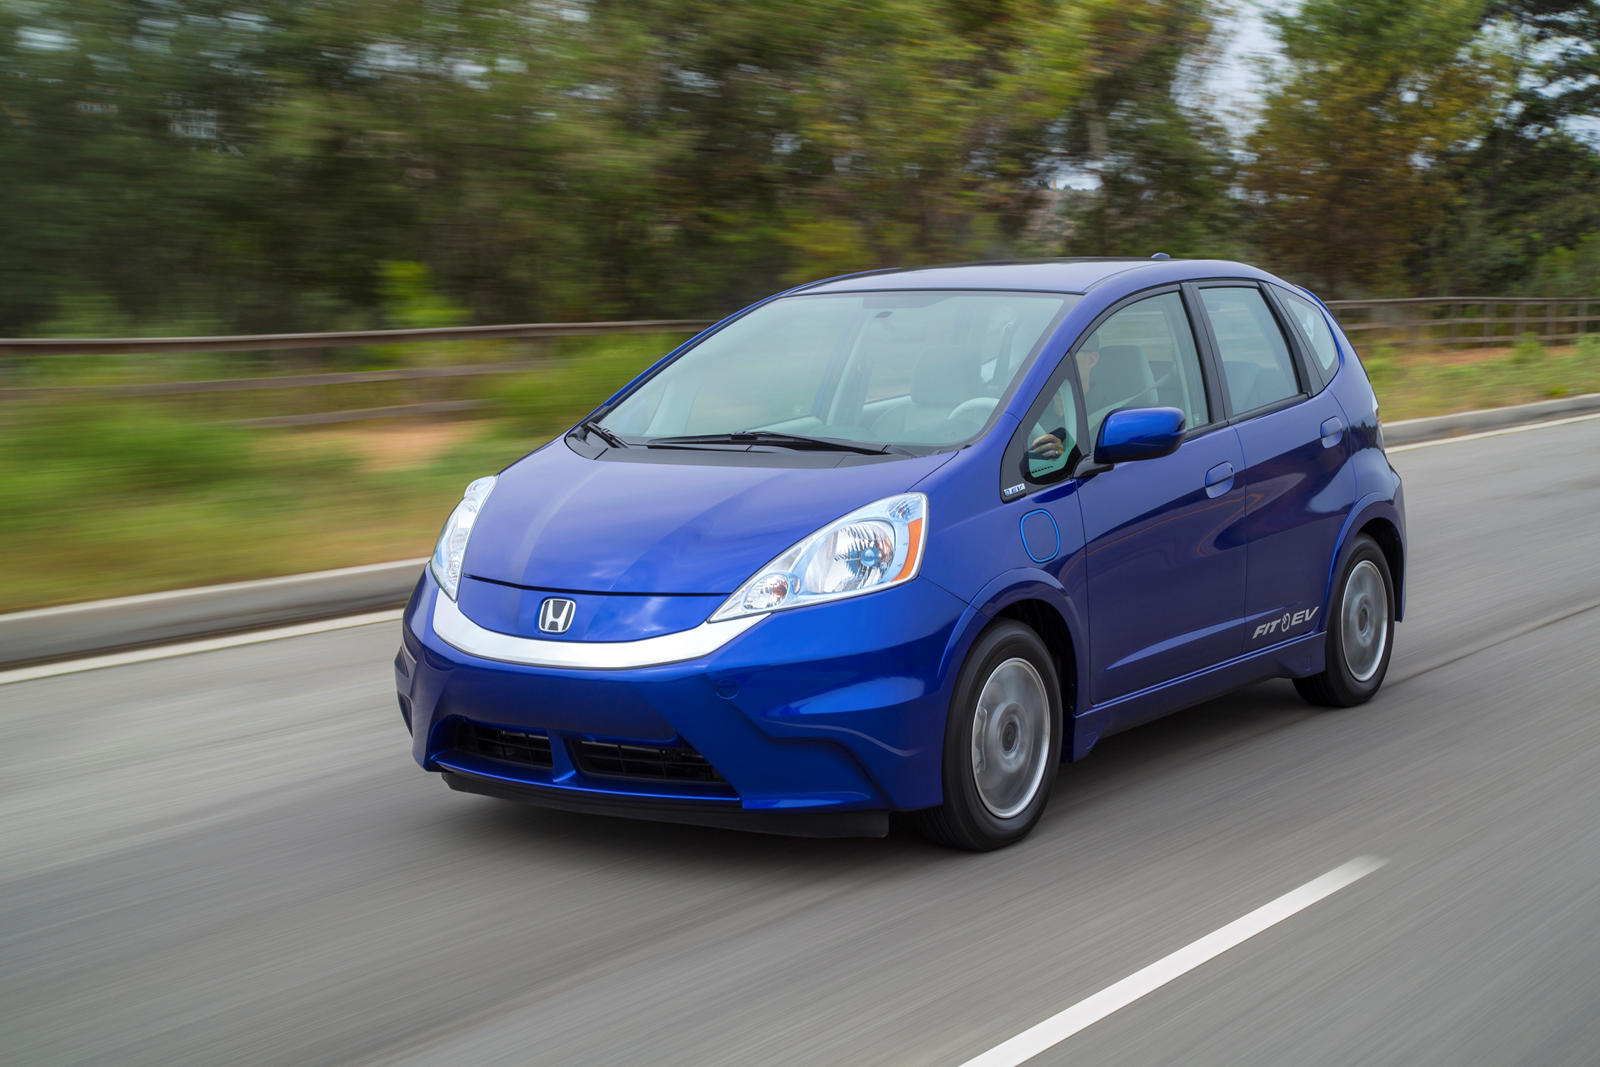 Used 2014 Honda Fit EV Prices, Reviews, and Pictures | Edmunds